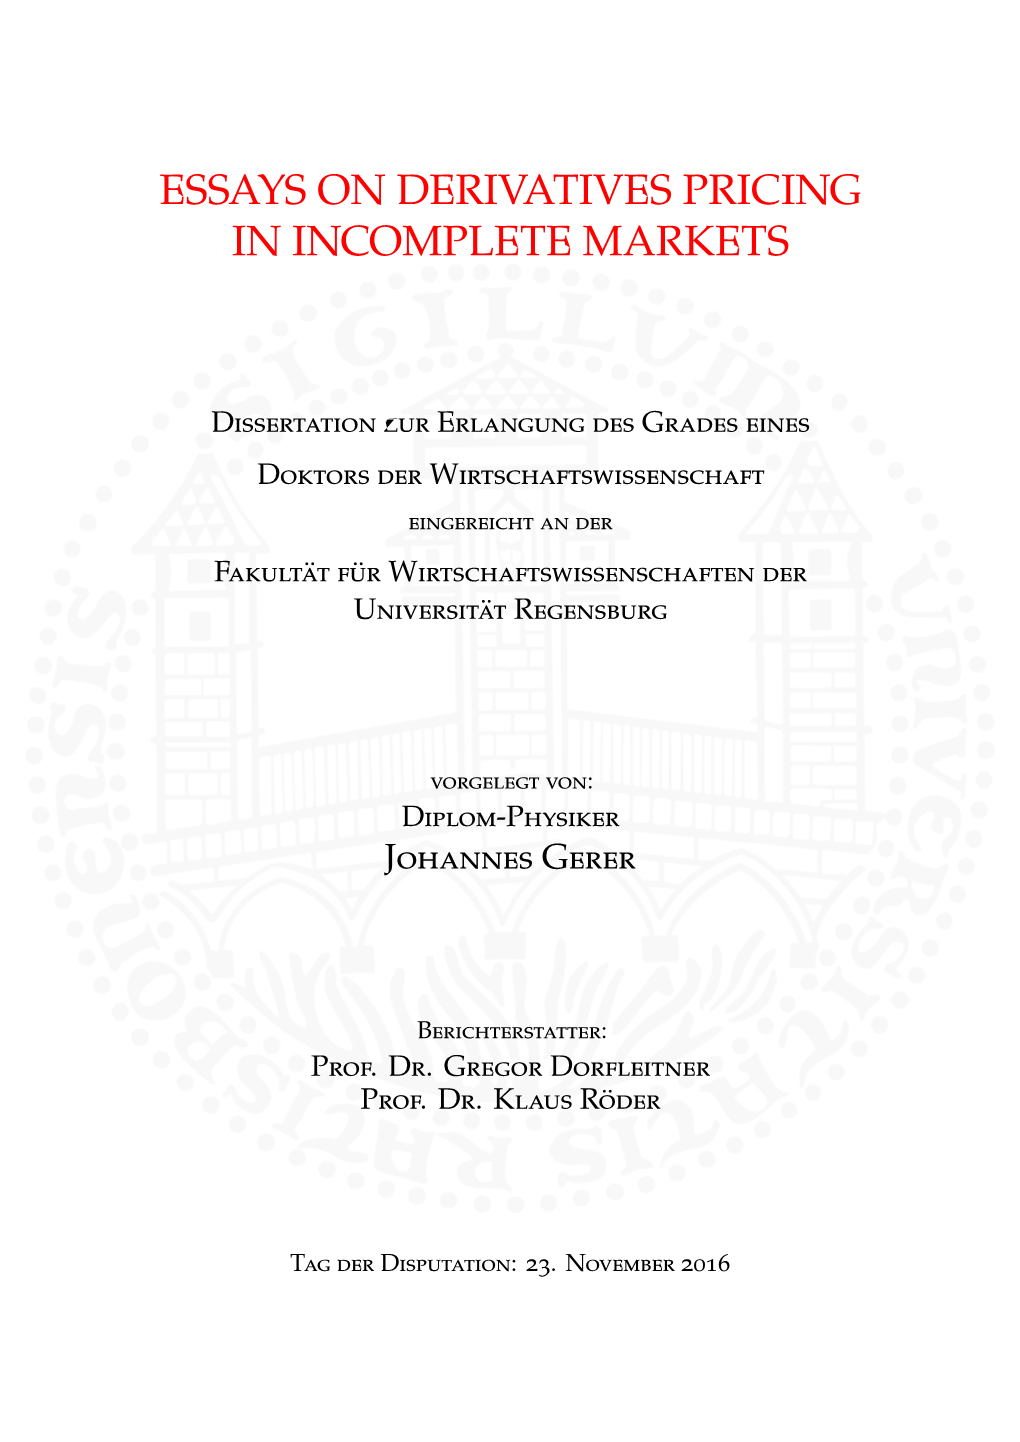 Essays on Derivatives Pricing in Incomplete Markets